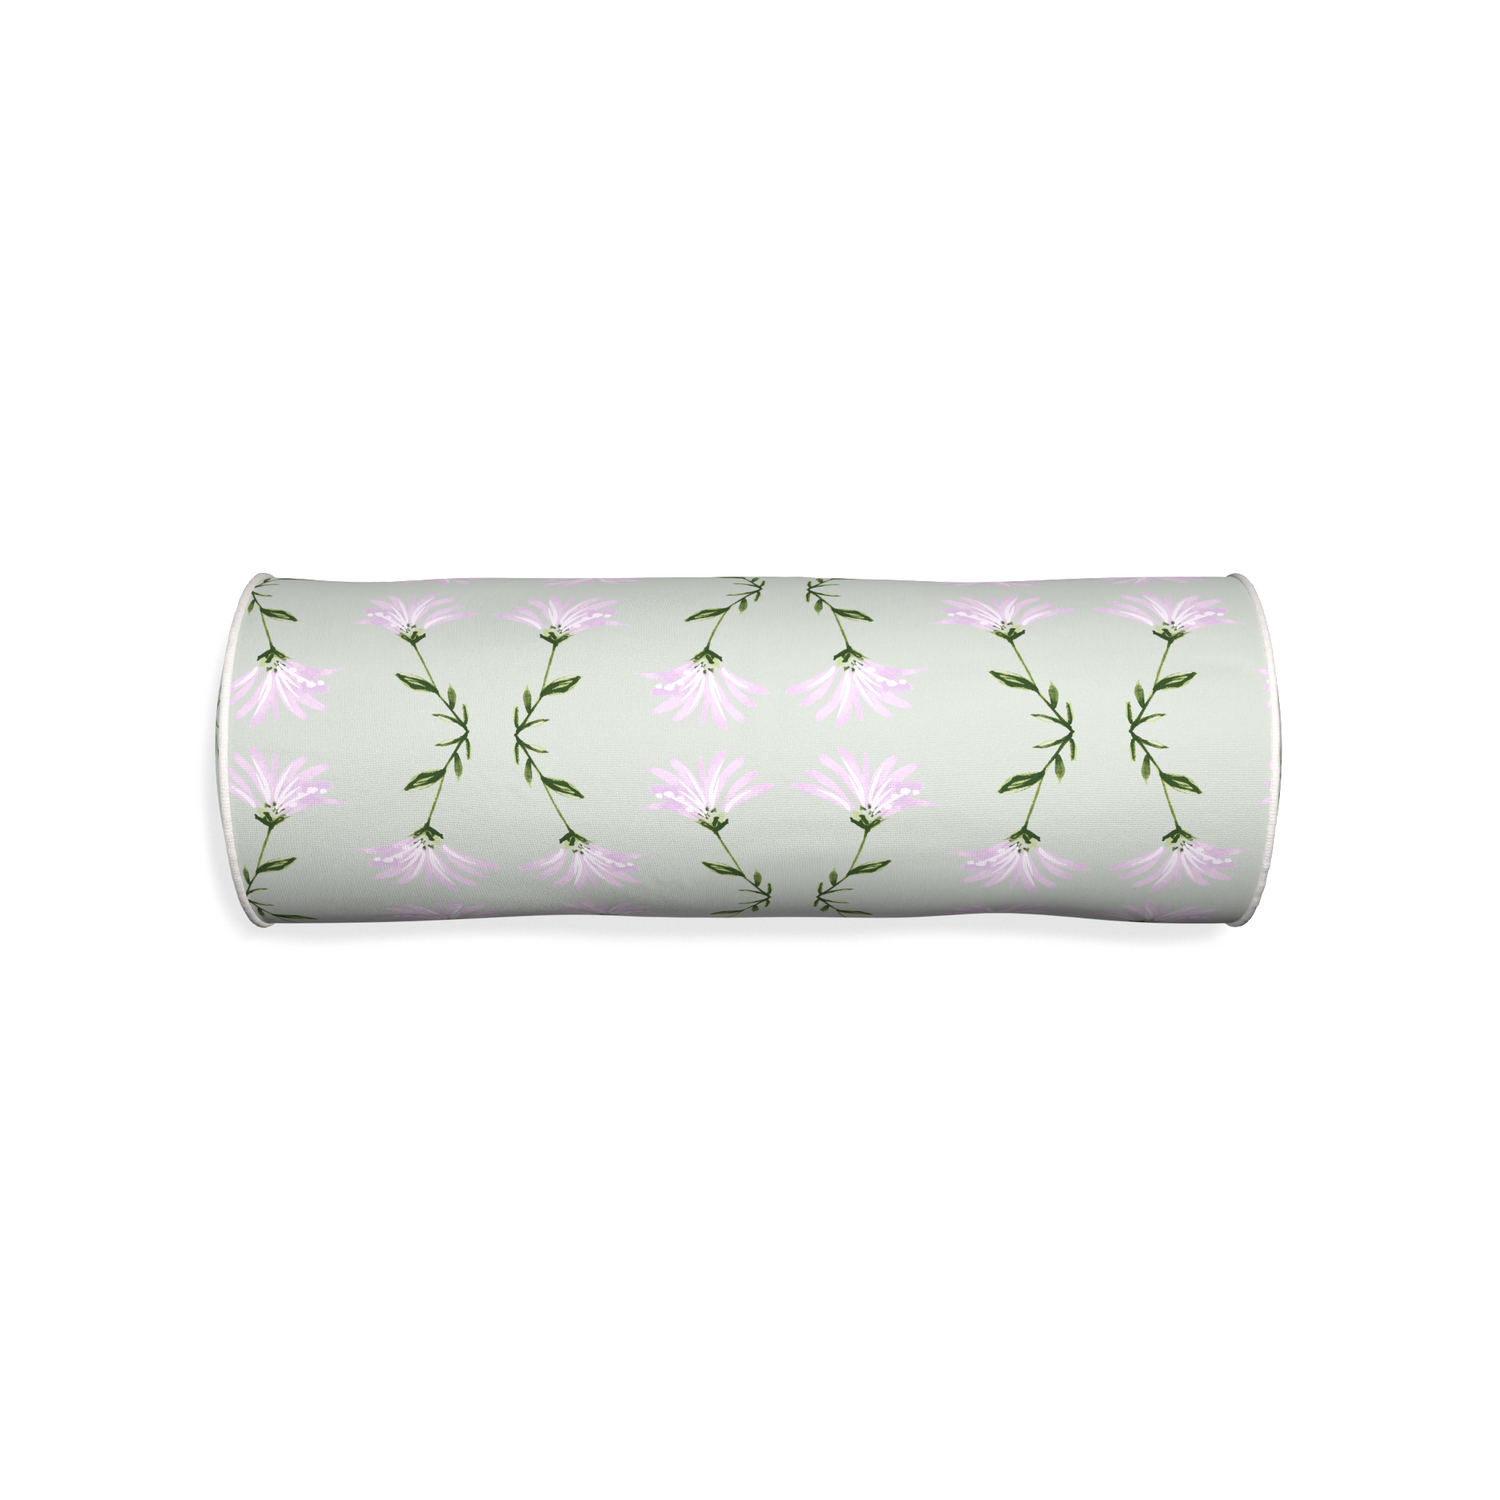 Bolster marina sage custom pillow with snow piping on white background